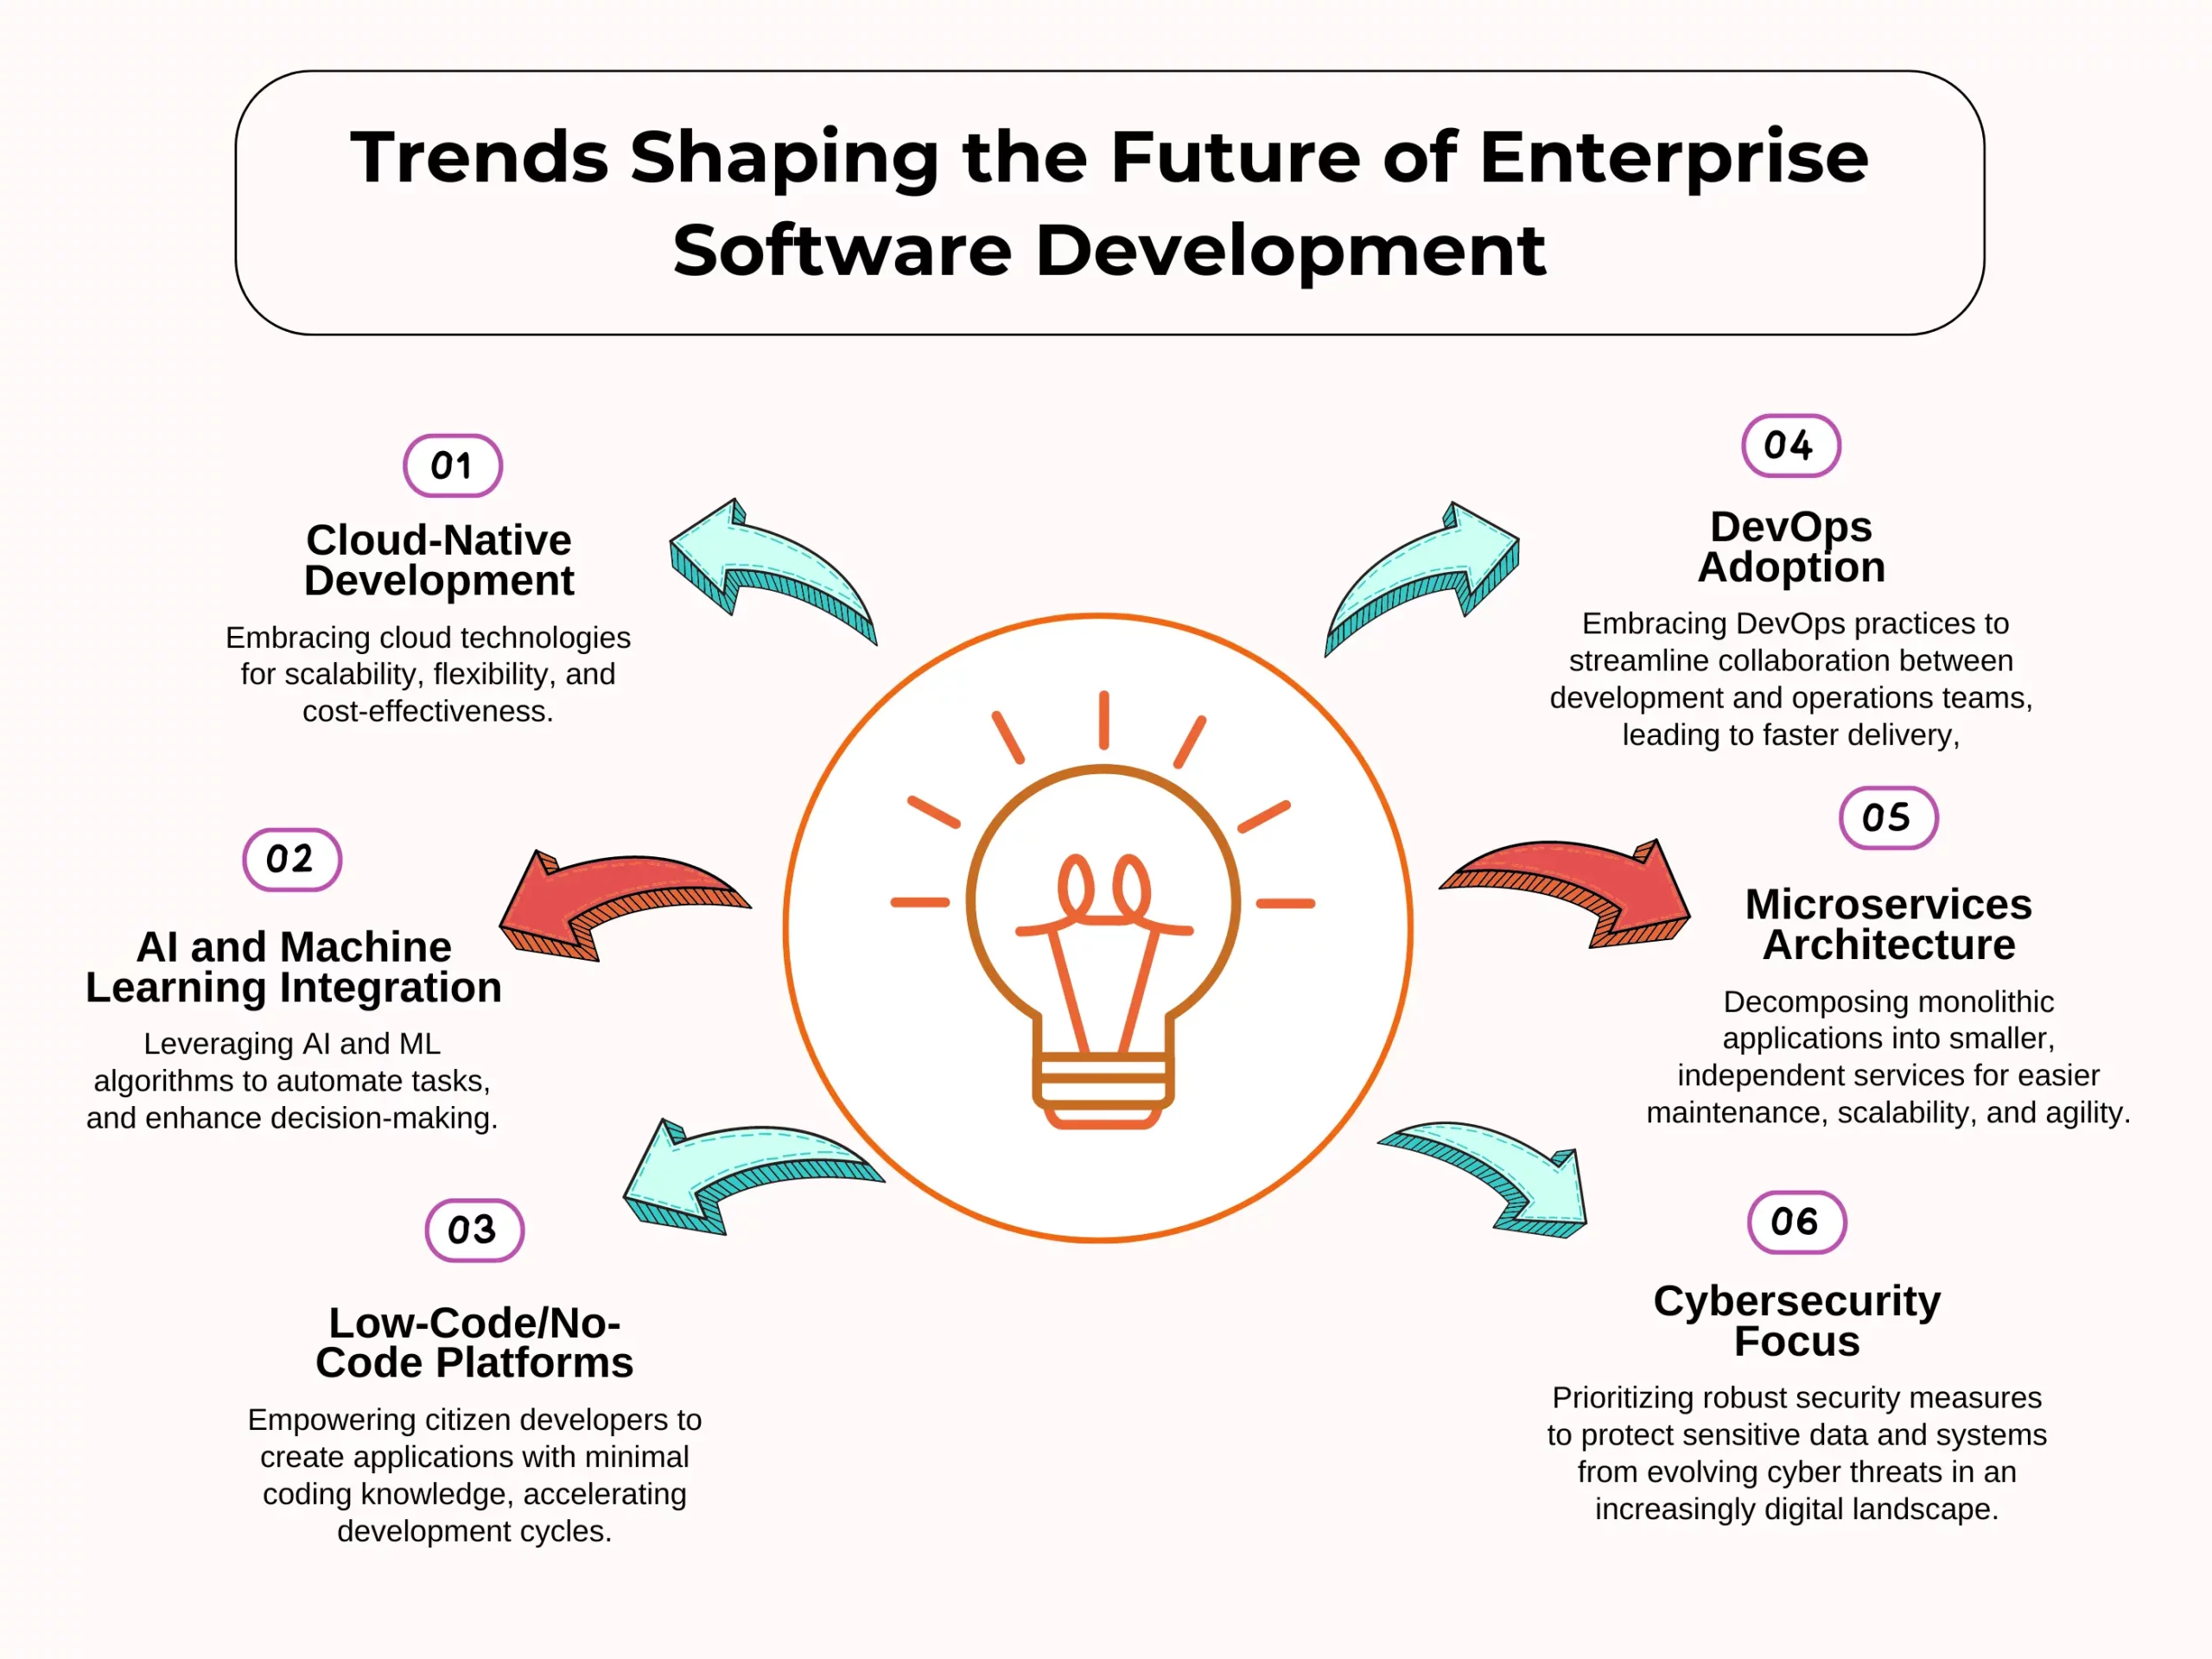 Trends Shaping the Future of Enterprise Software Development